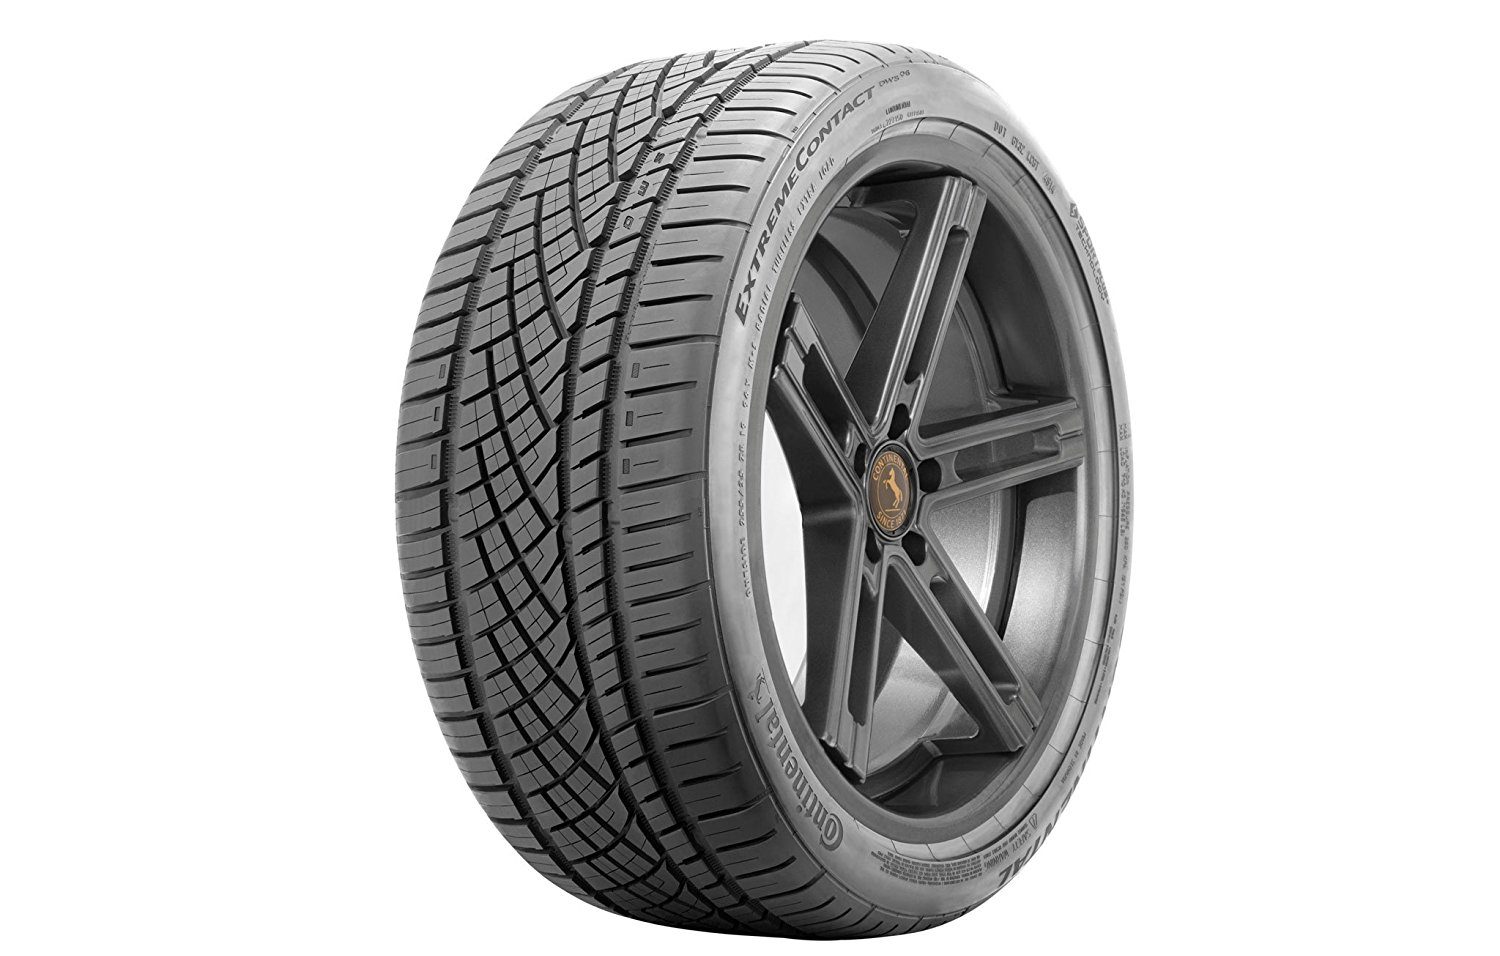 Best All Season Tires Reviews and Comparison